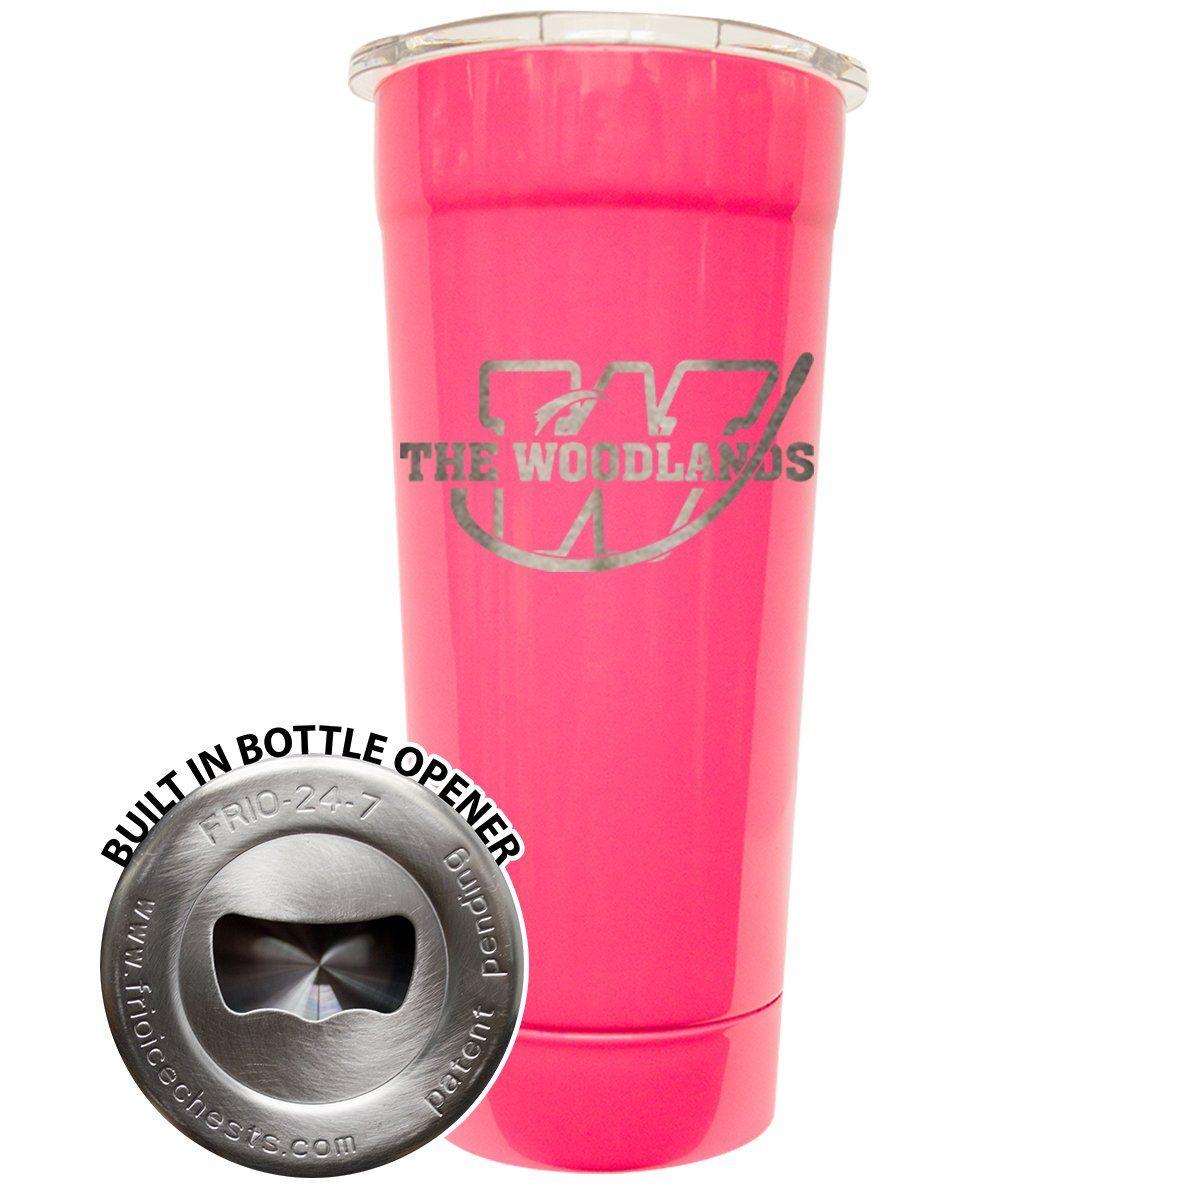 TWHS Logo - Frio 24 7 Neon Pink Powder Coated Cup W/ Bottle Opener And TWHS Logo